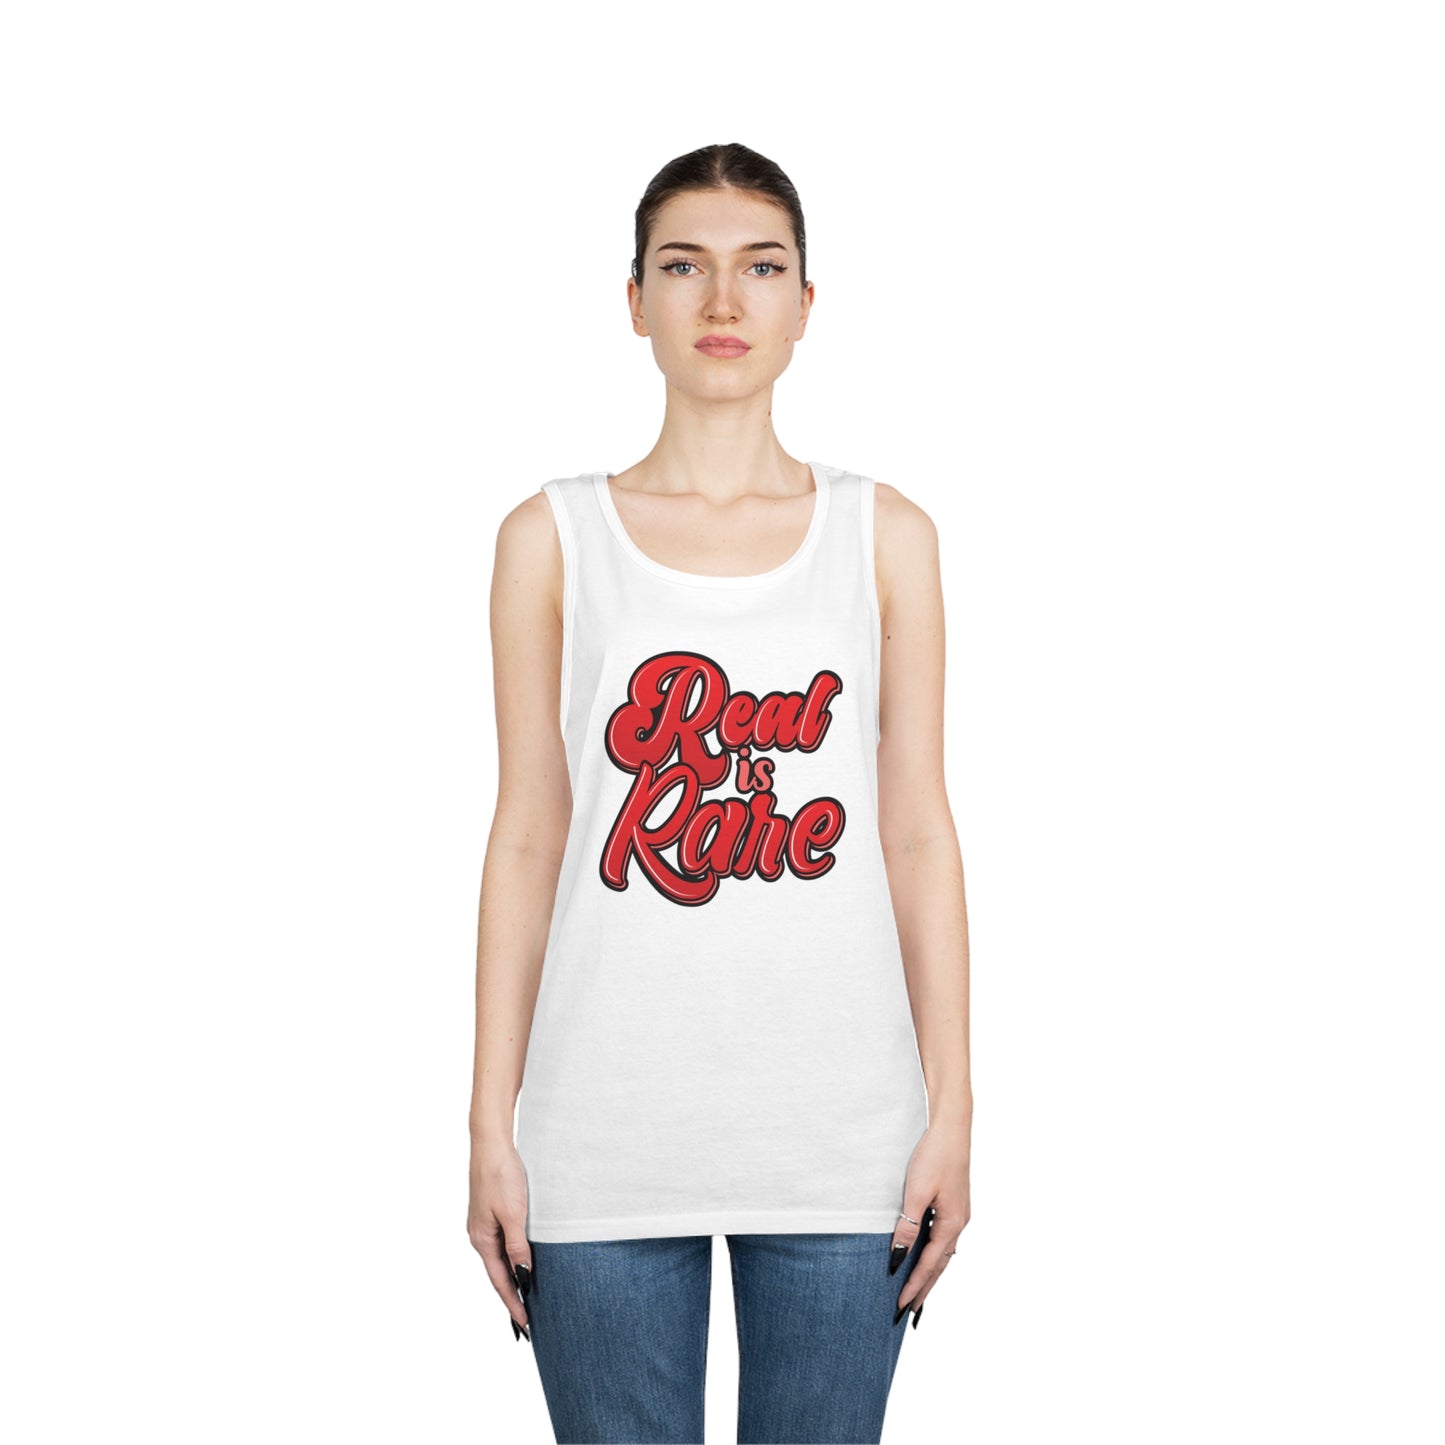 Real is rare Tank Top